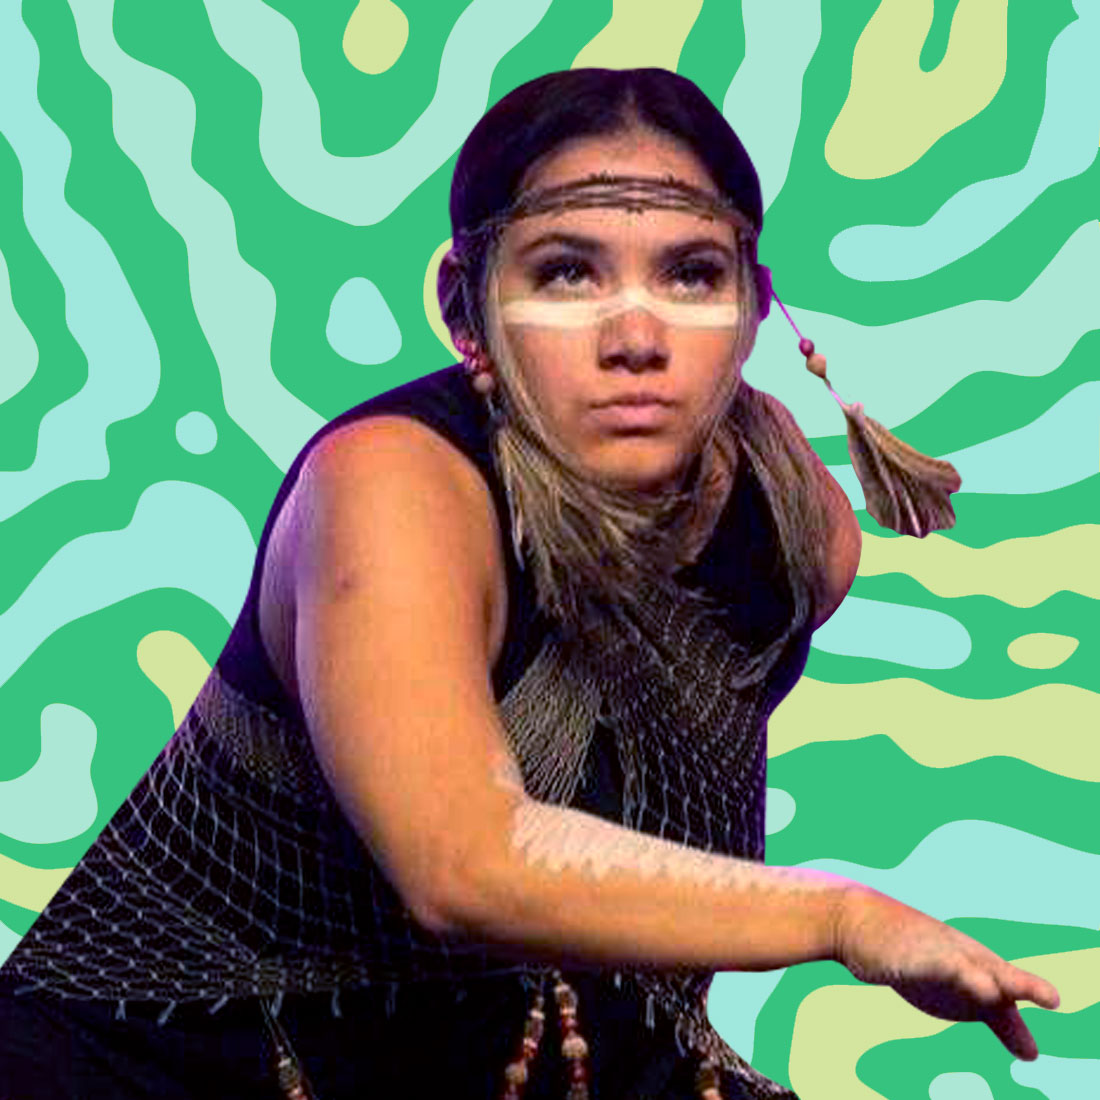 A headshot of a young person with painted arms and face in a dance-like movement a green and yellow striped background